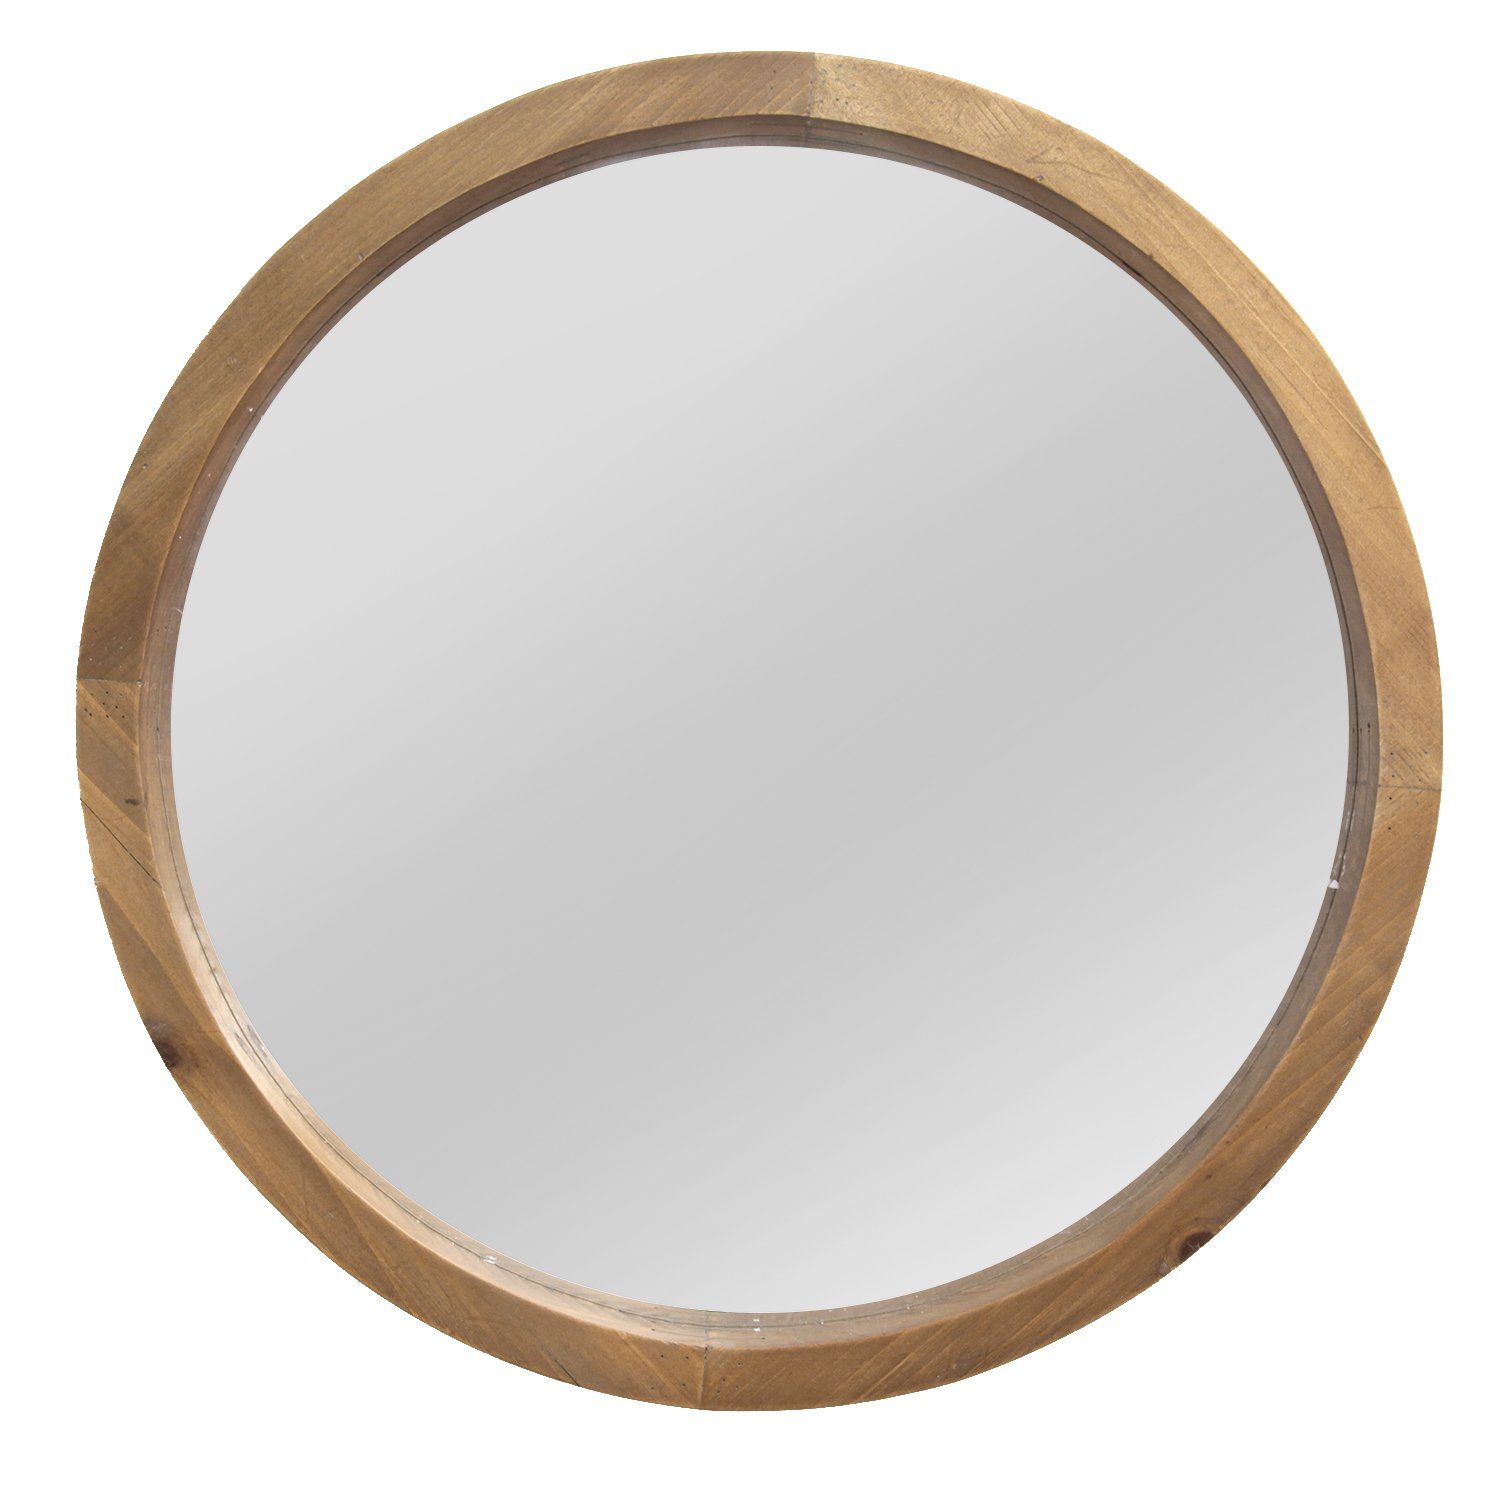 Woven Paths 20" Natural Wood Round Wall Mirror – Walmart – Walmart For Organic Natural Wood Round Wall Mirrors (View 2 of 15)